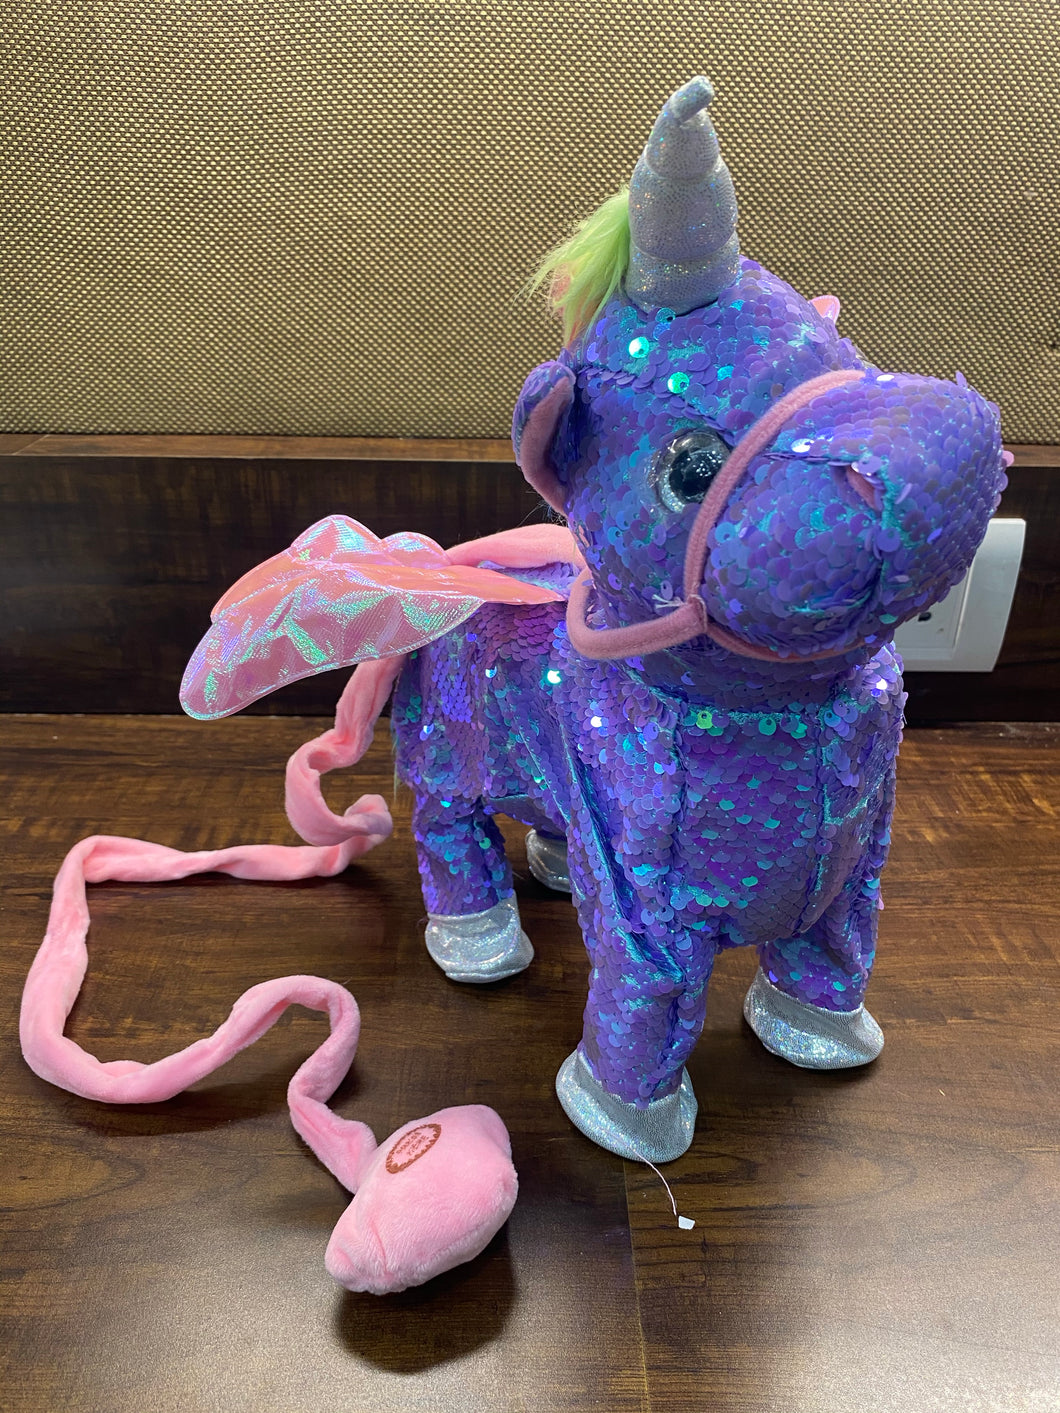 Unicorn Walking Toy with Wire Remote Leash